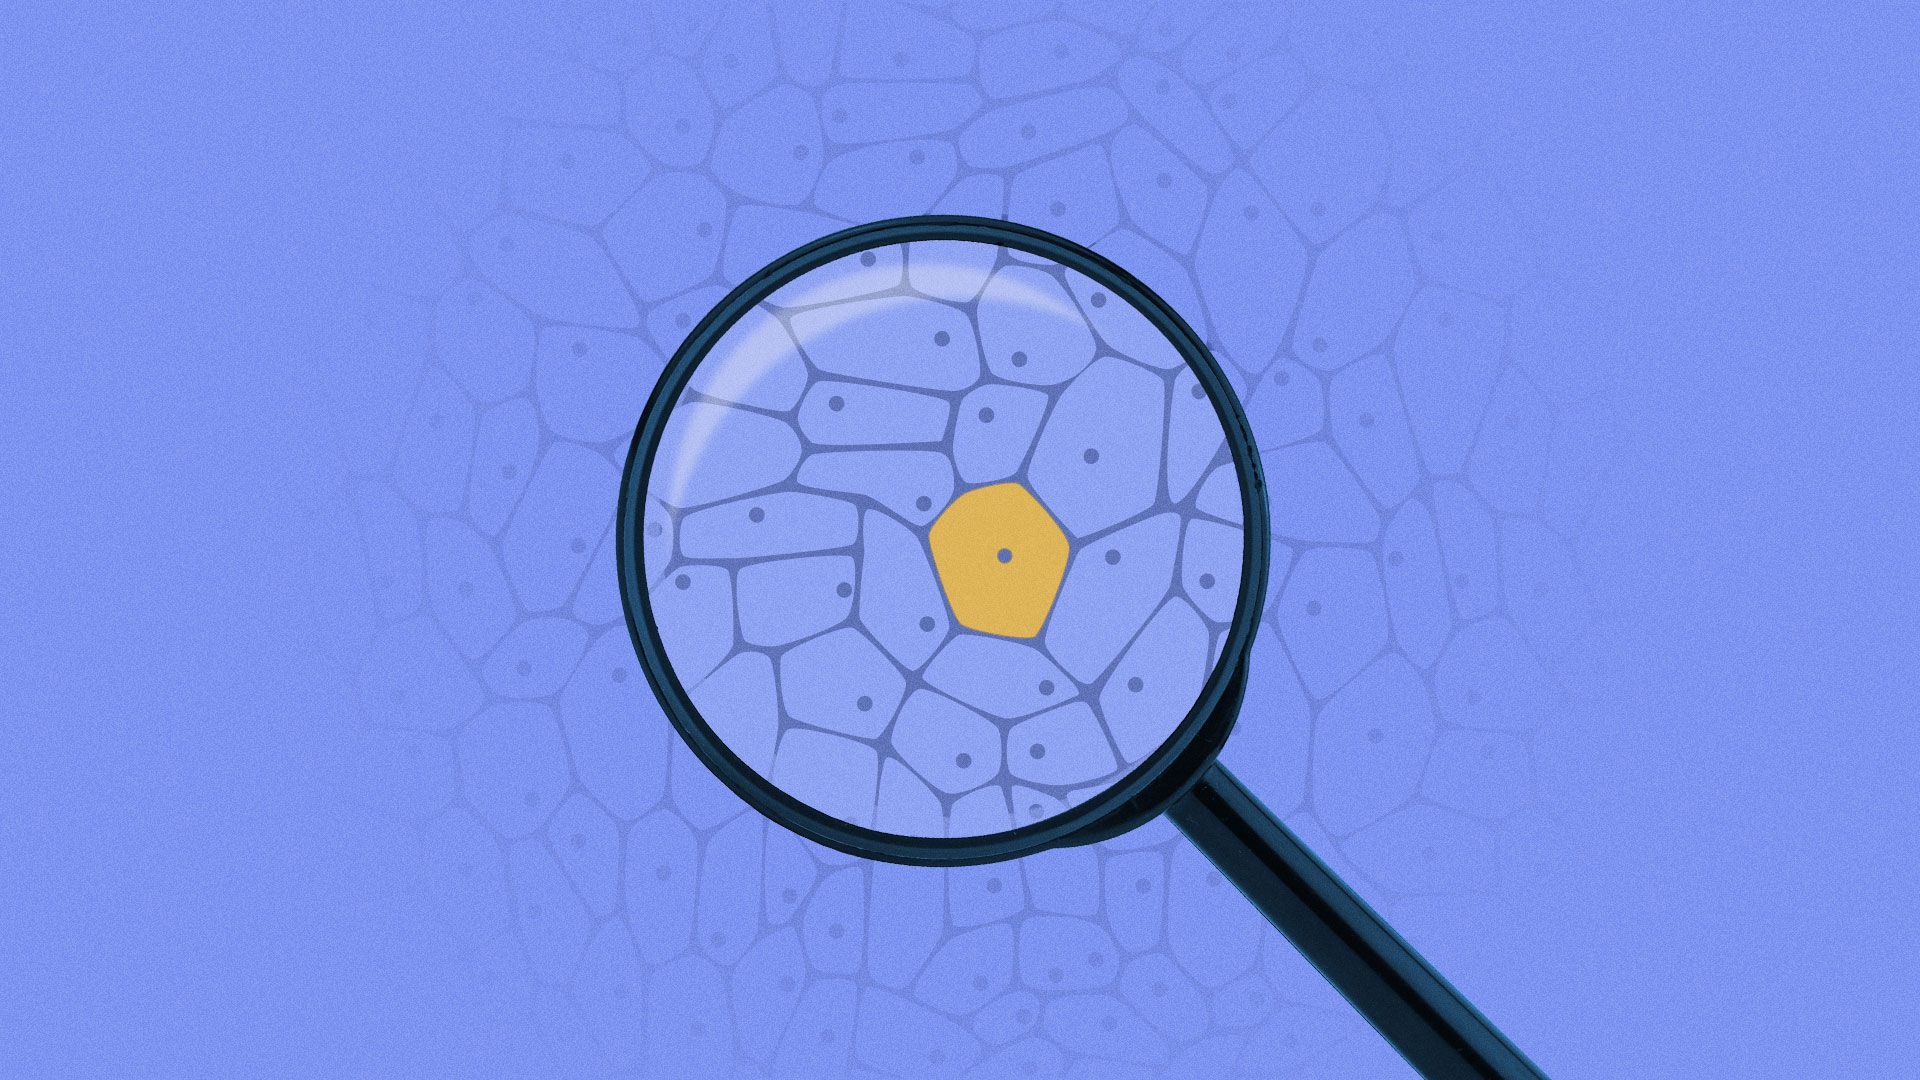 Illustration of magnifying glass over a cell pattern with a single glowing cell